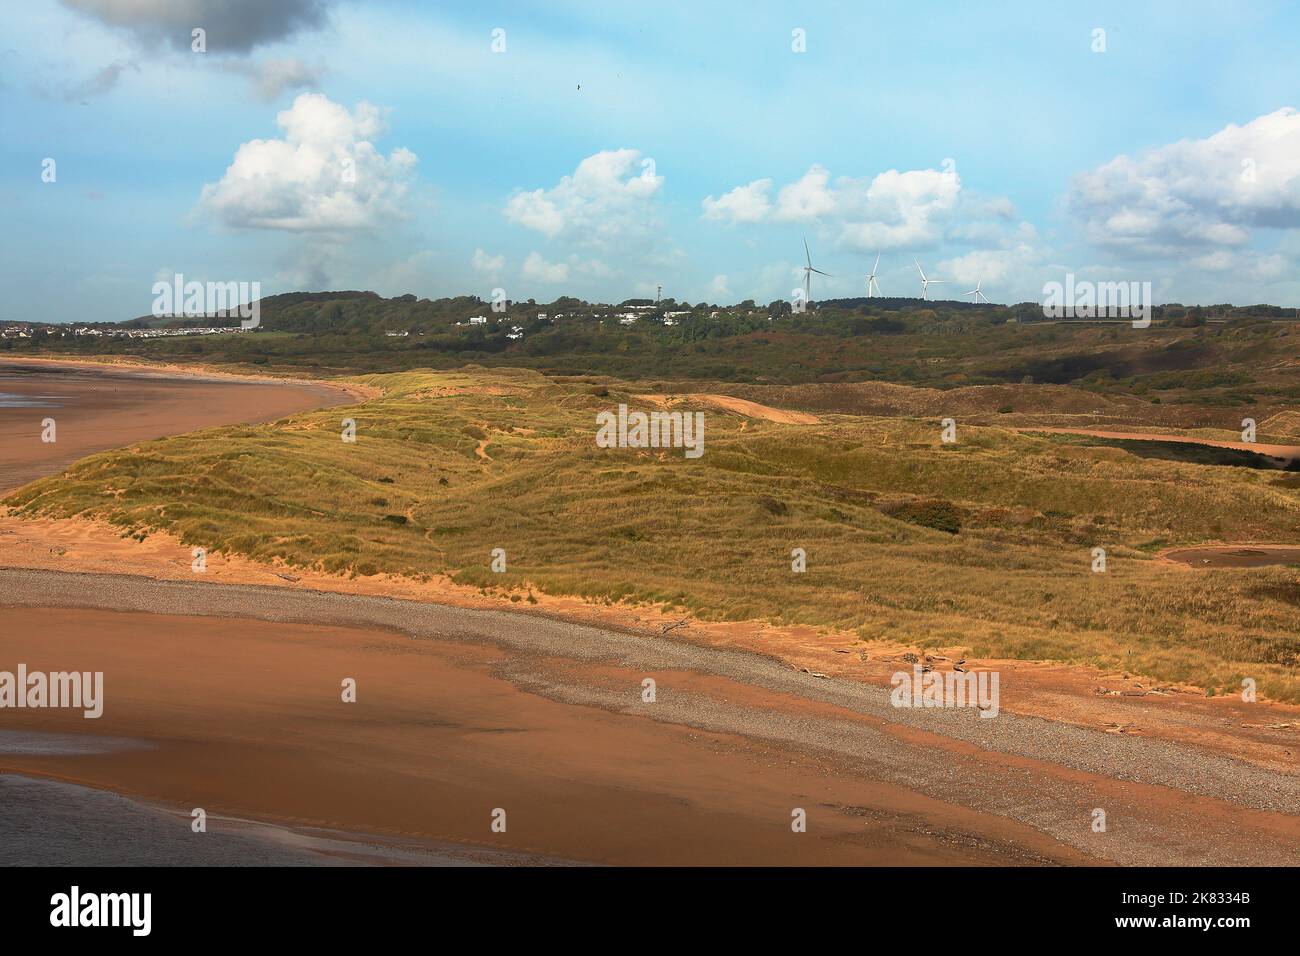 Overview of Merthyr Mawr sand dunes near Bridgend with plenty of walking trails and beautiful beaches as well as occasional horses galloping across. Stock Photo